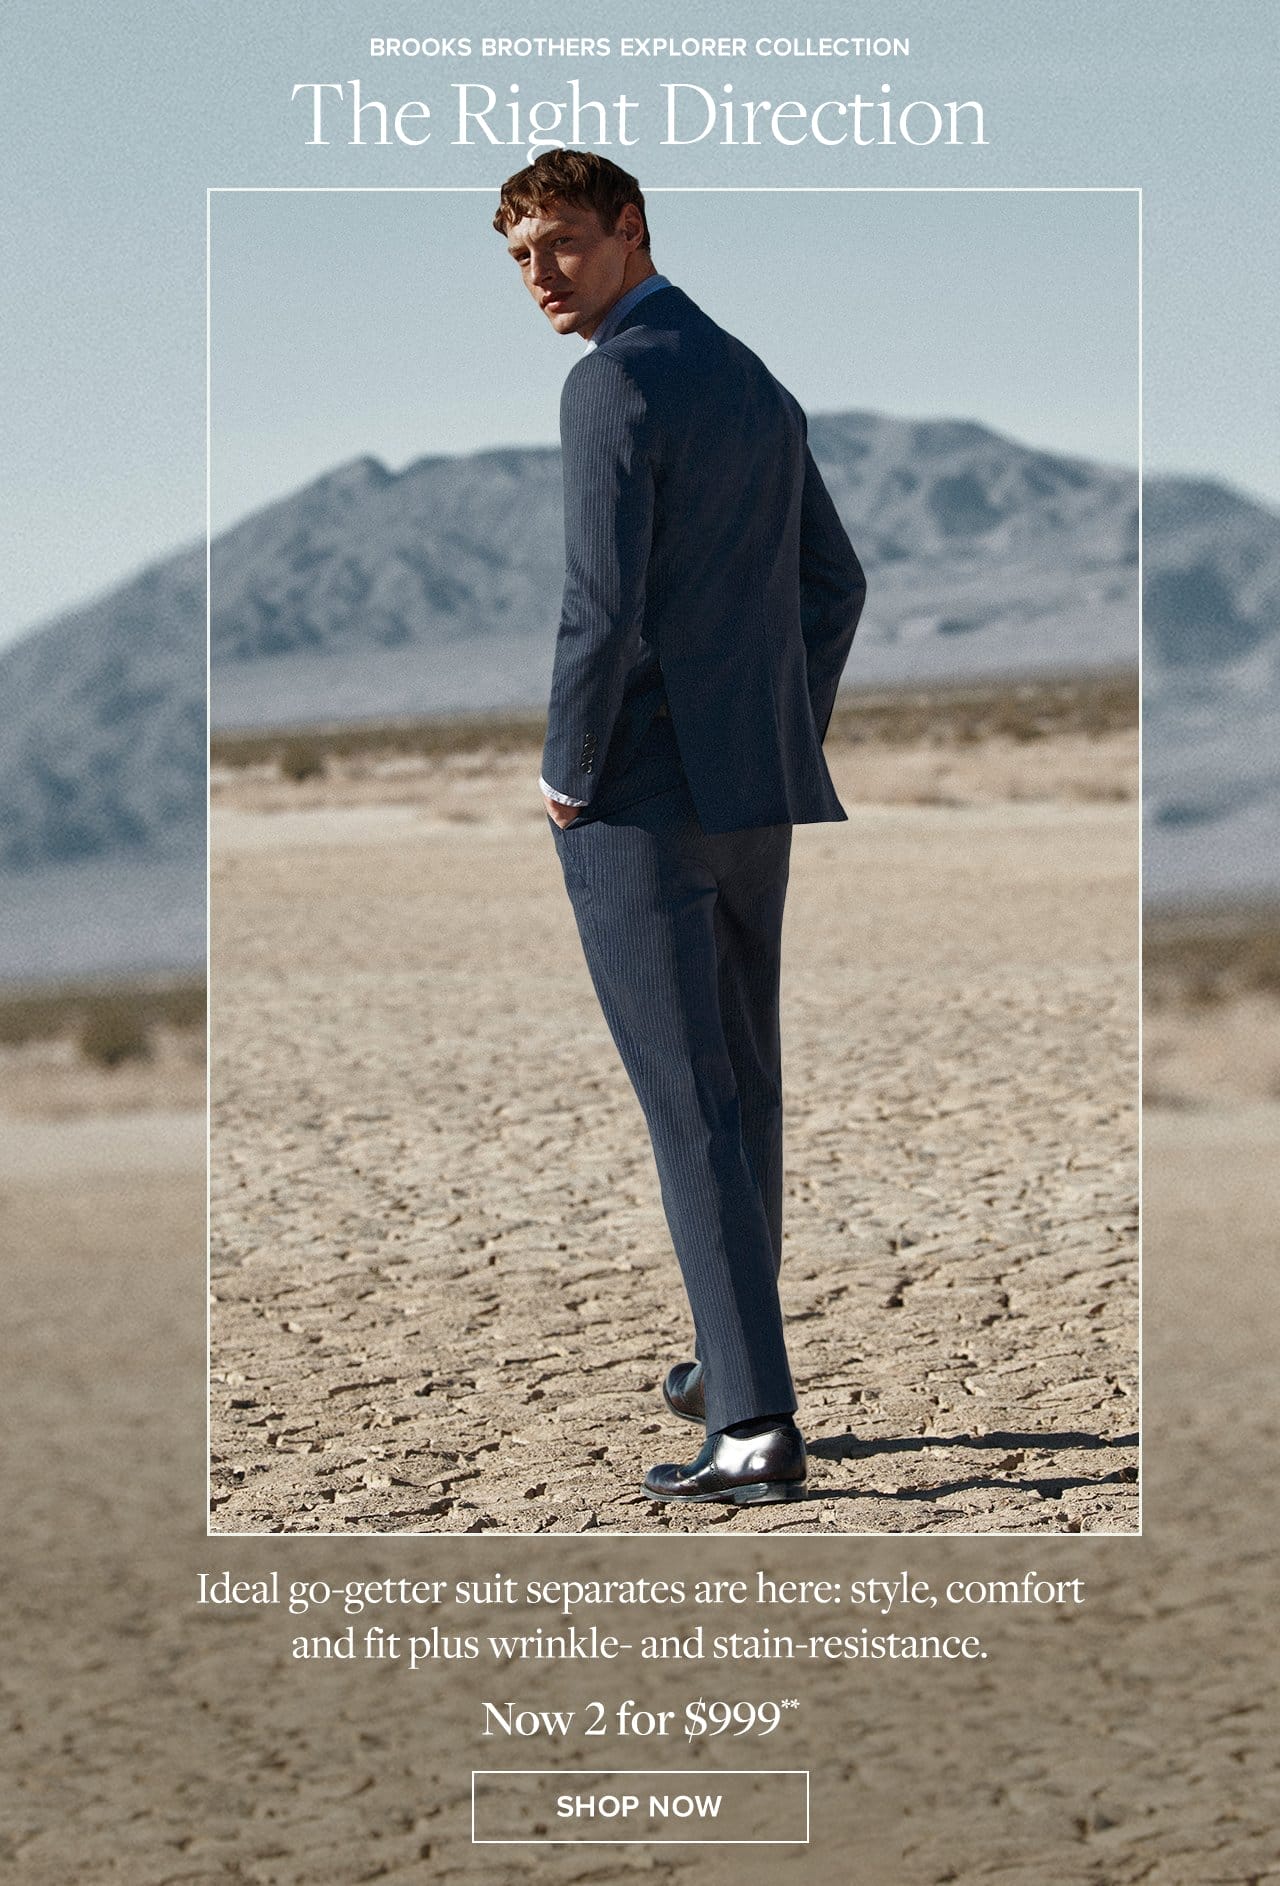 Brooks Brothers Explorer Collection The Right Direction Ideal go-getter suit separates are here: style, comfort and fit plus wrinkle- and stain resistance. Now 2 for \\$999 Shop Now